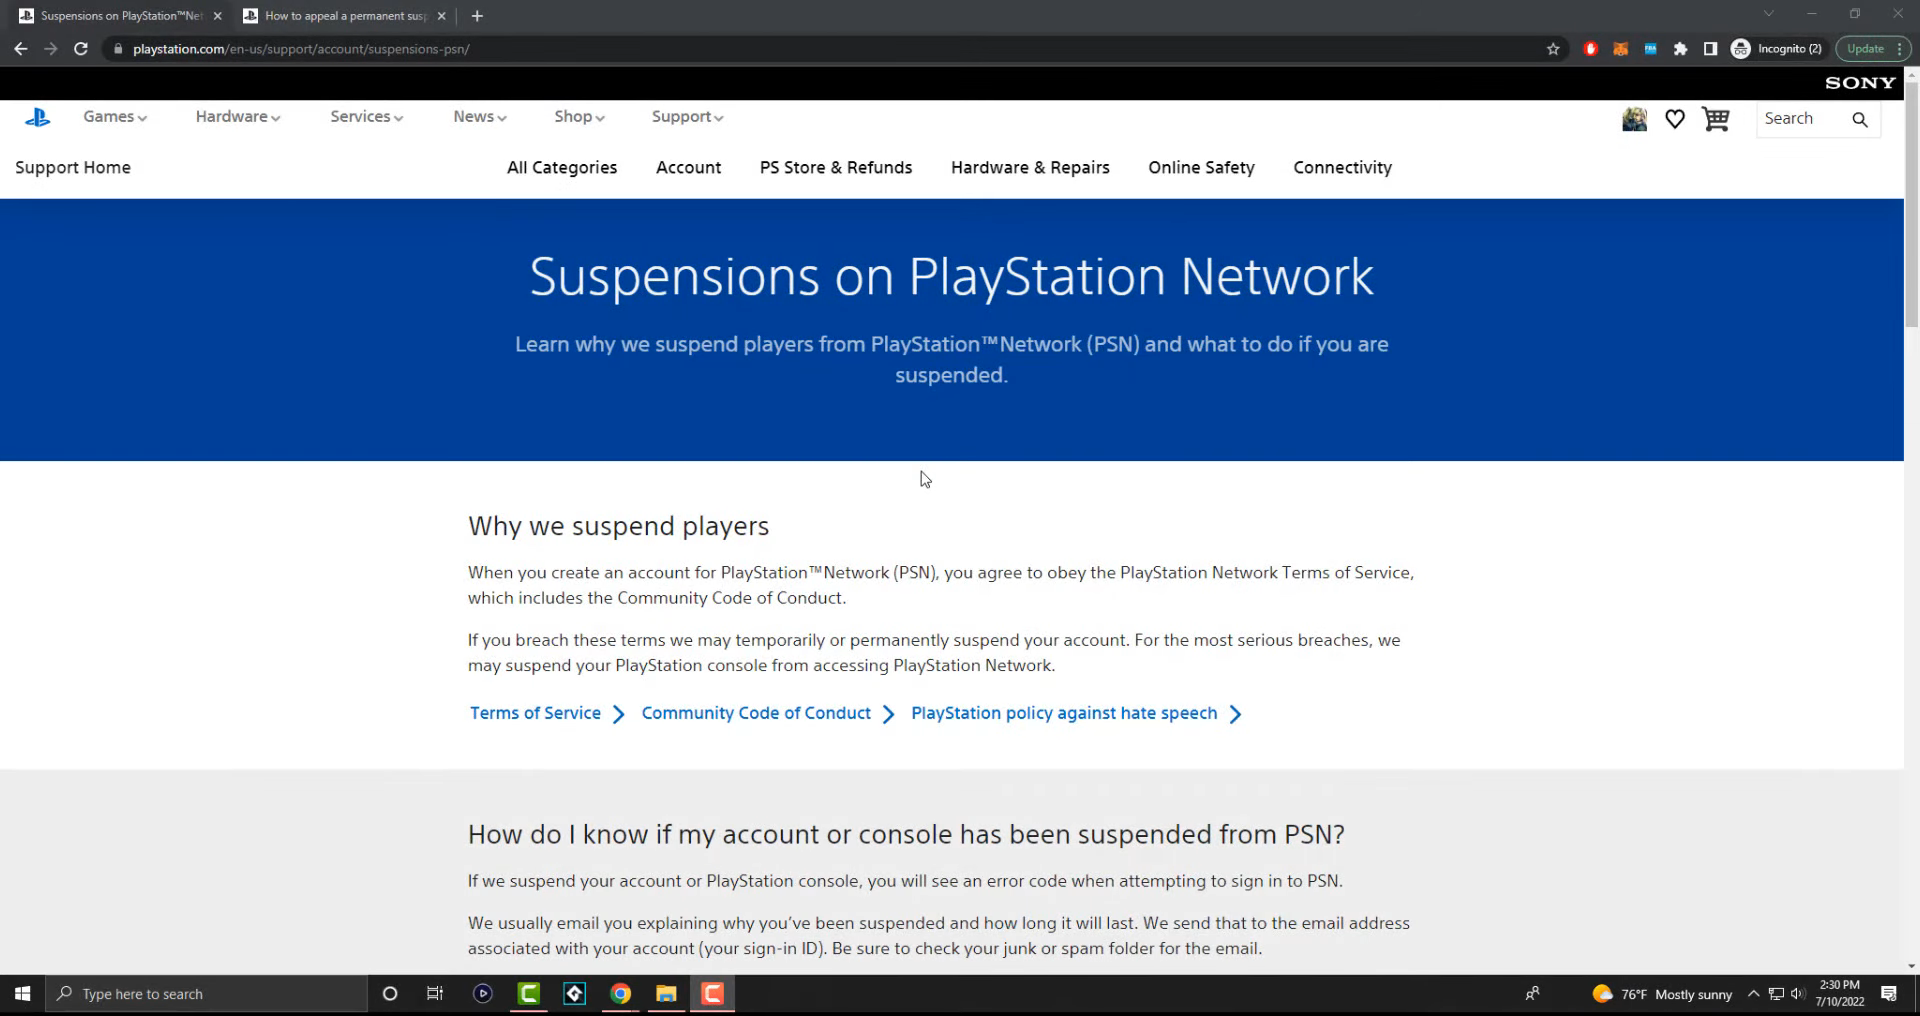 To appeal, you have to go to ''playstation.com/en-us/support/account/suspension-psn/''.